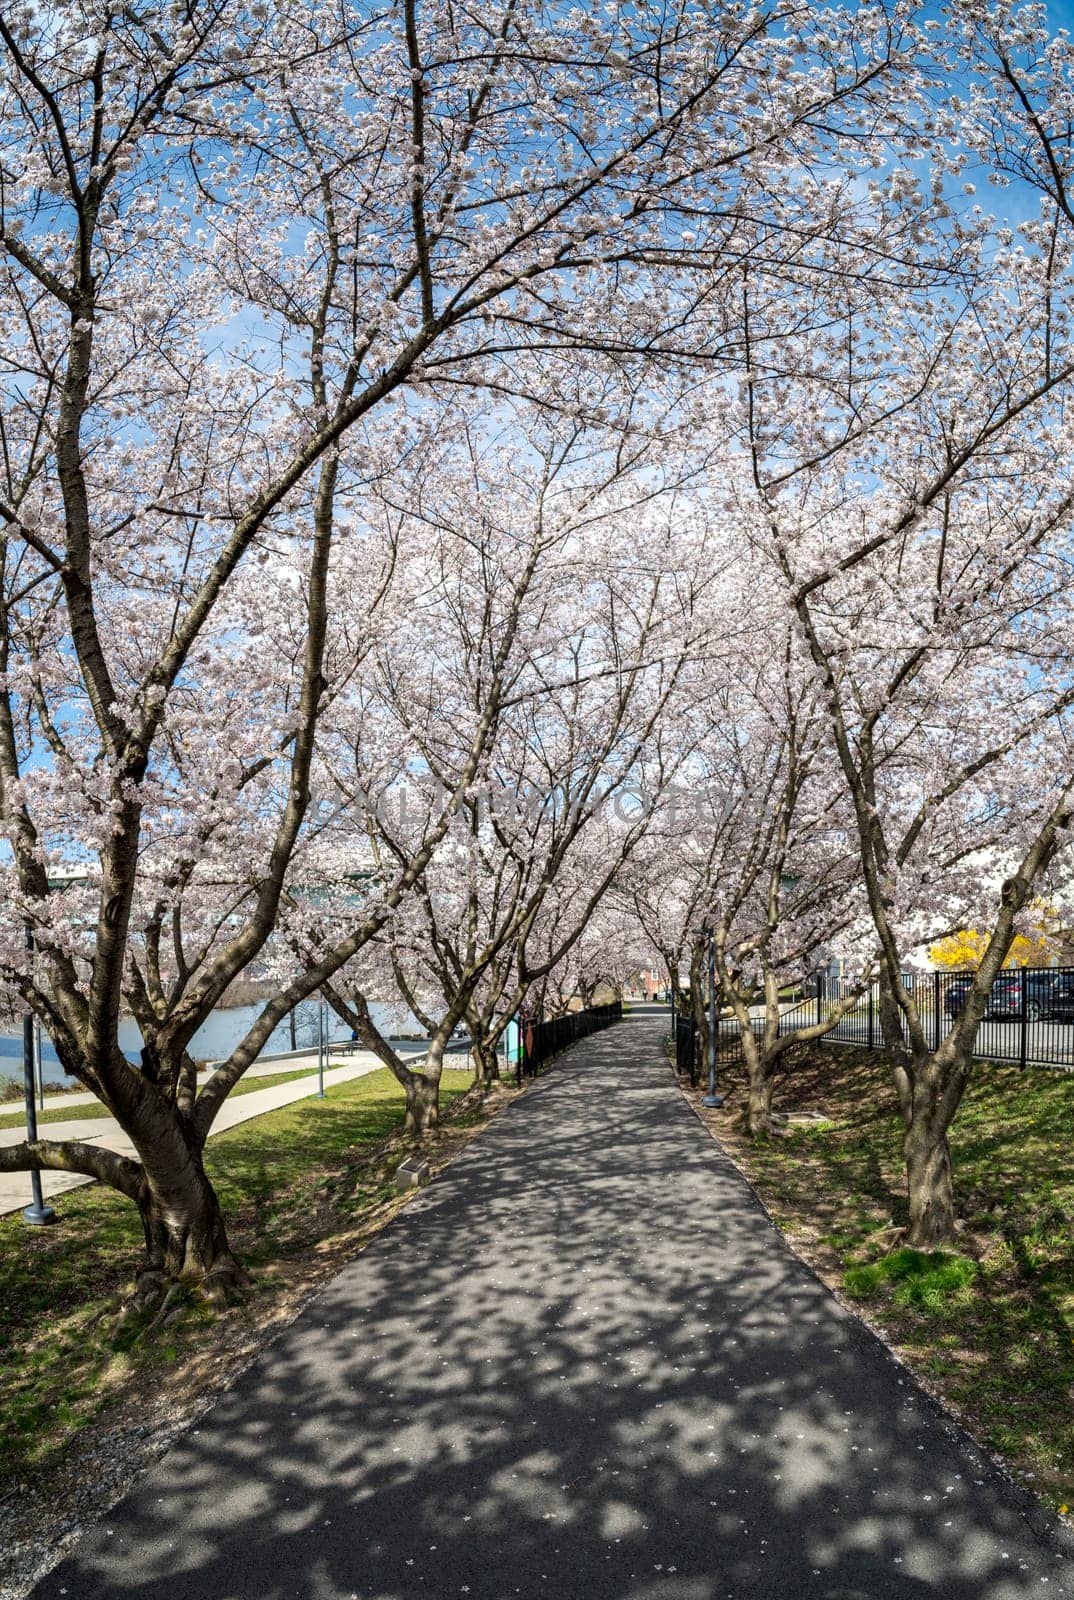 Cherry blossoms over walking trail by the river in Morgantown WV by steheap